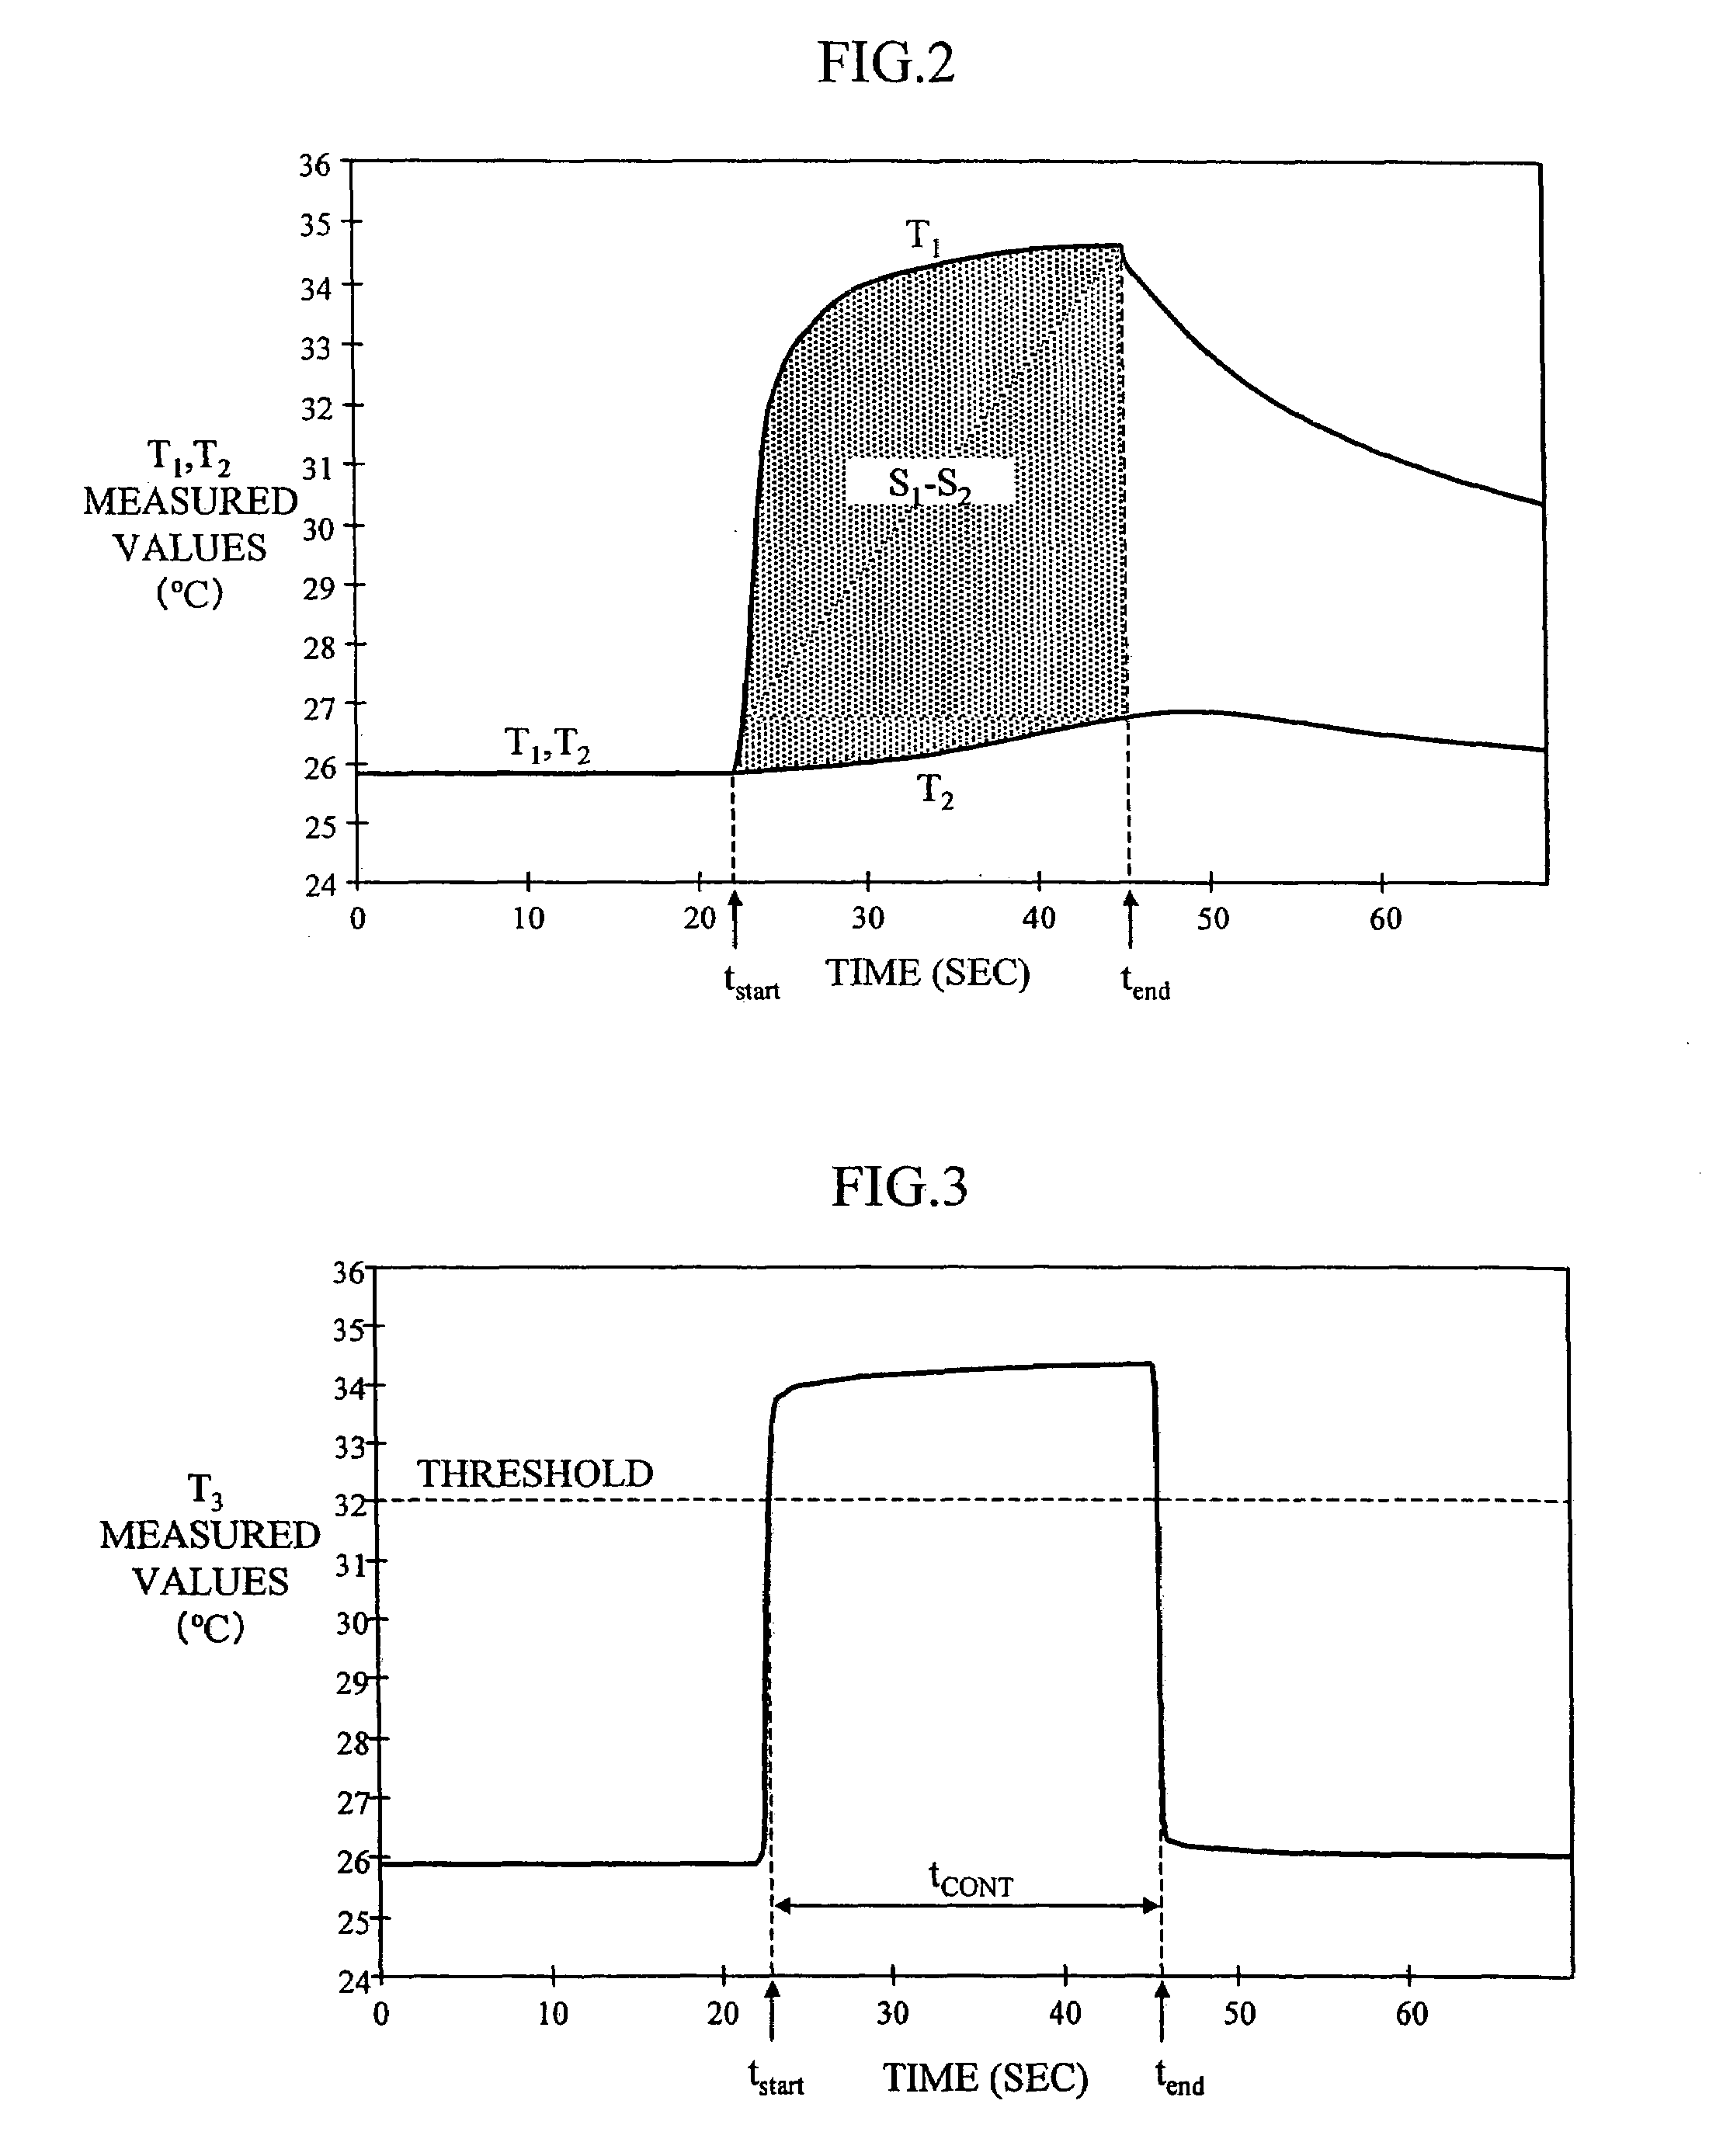 Measuring apparatus for measuring a metabolic characteristic in a human body